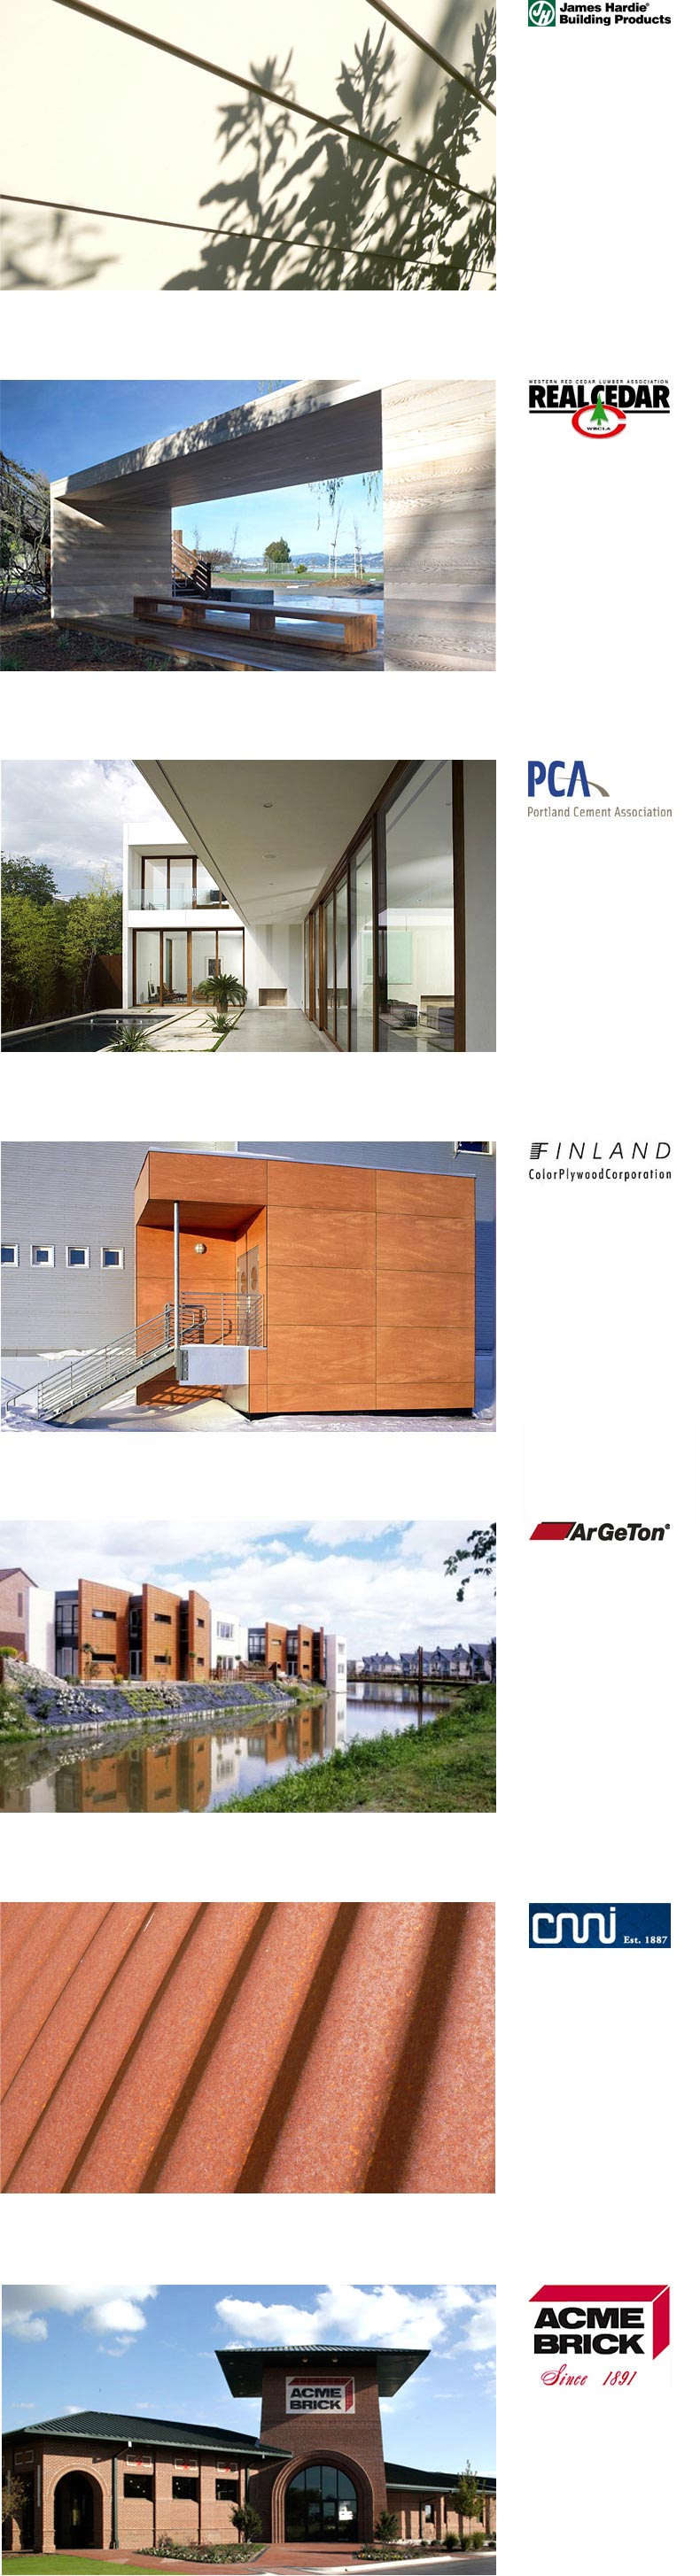 Product Resources images for the wf2studio modern plan collection website